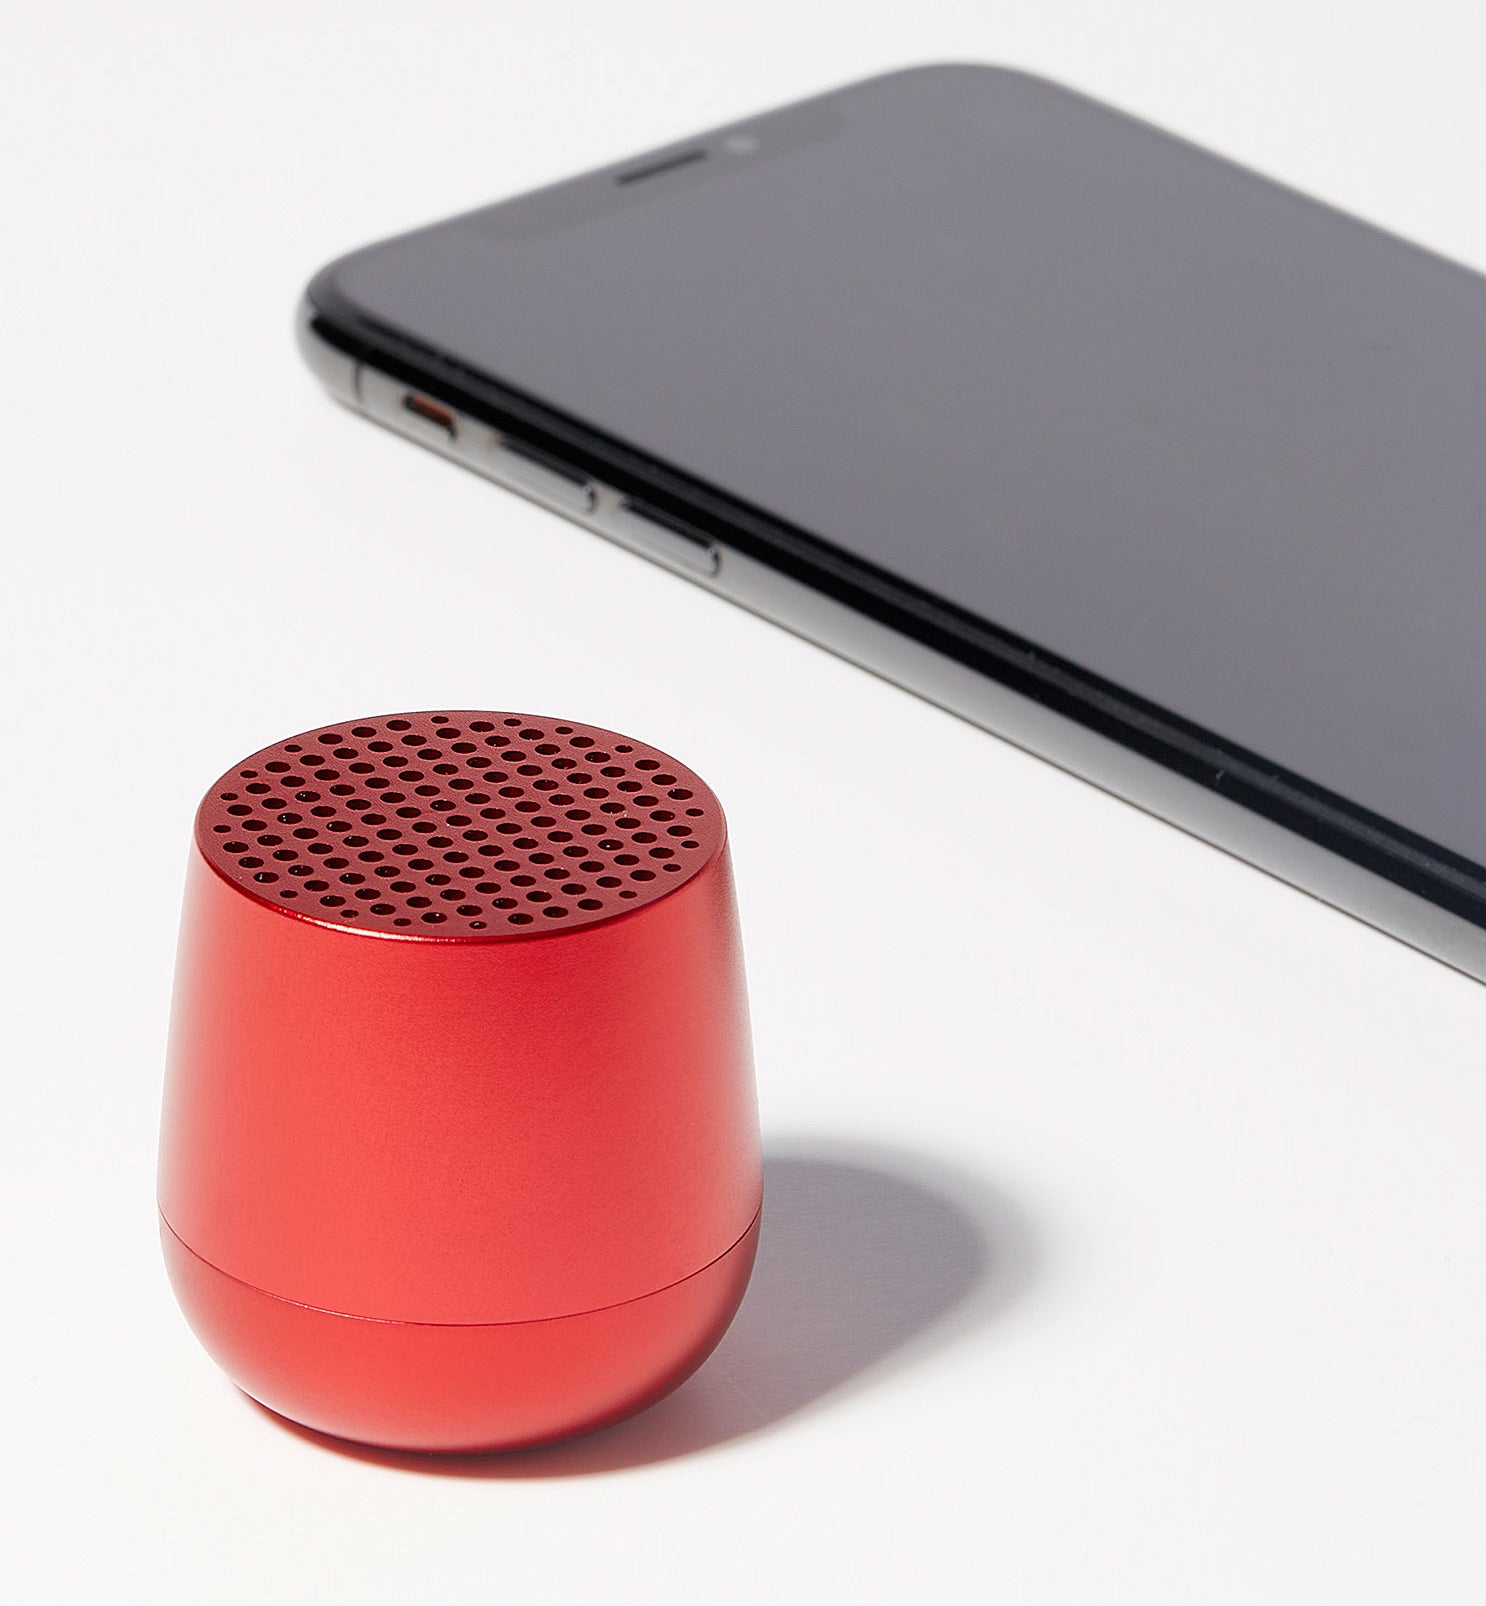 The mini bluetooth speaker next to a cell phone for scale